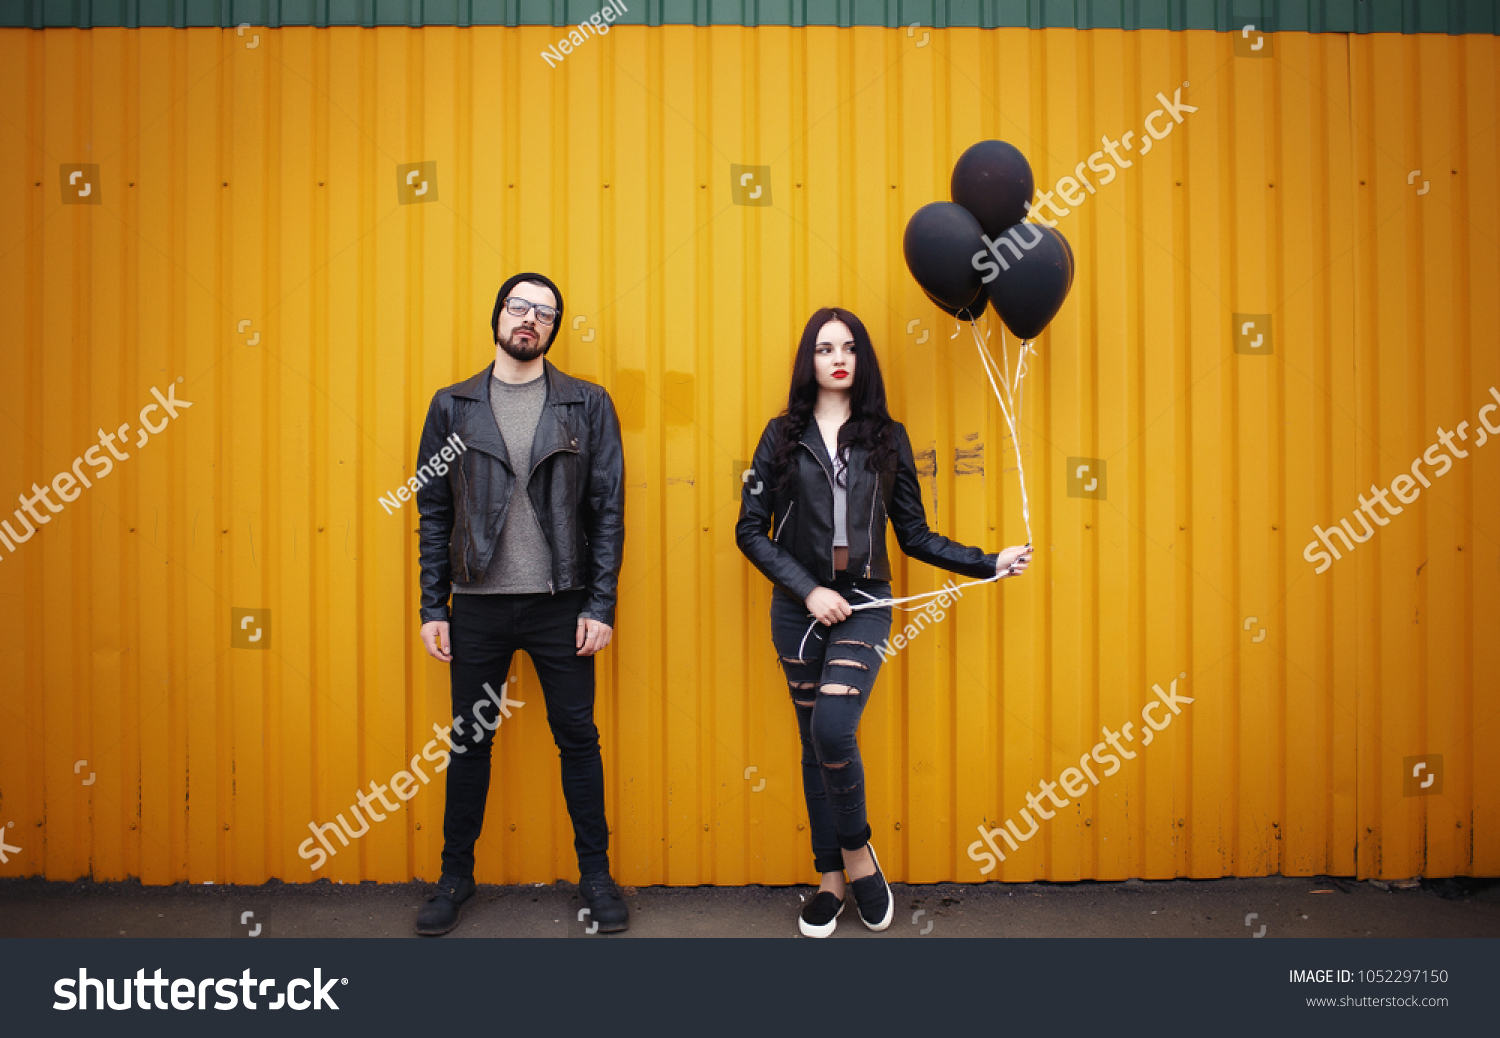 Stylish enamored guy and girl in leather jackets near a yellow green wall with black air balloons in hands #1052297150